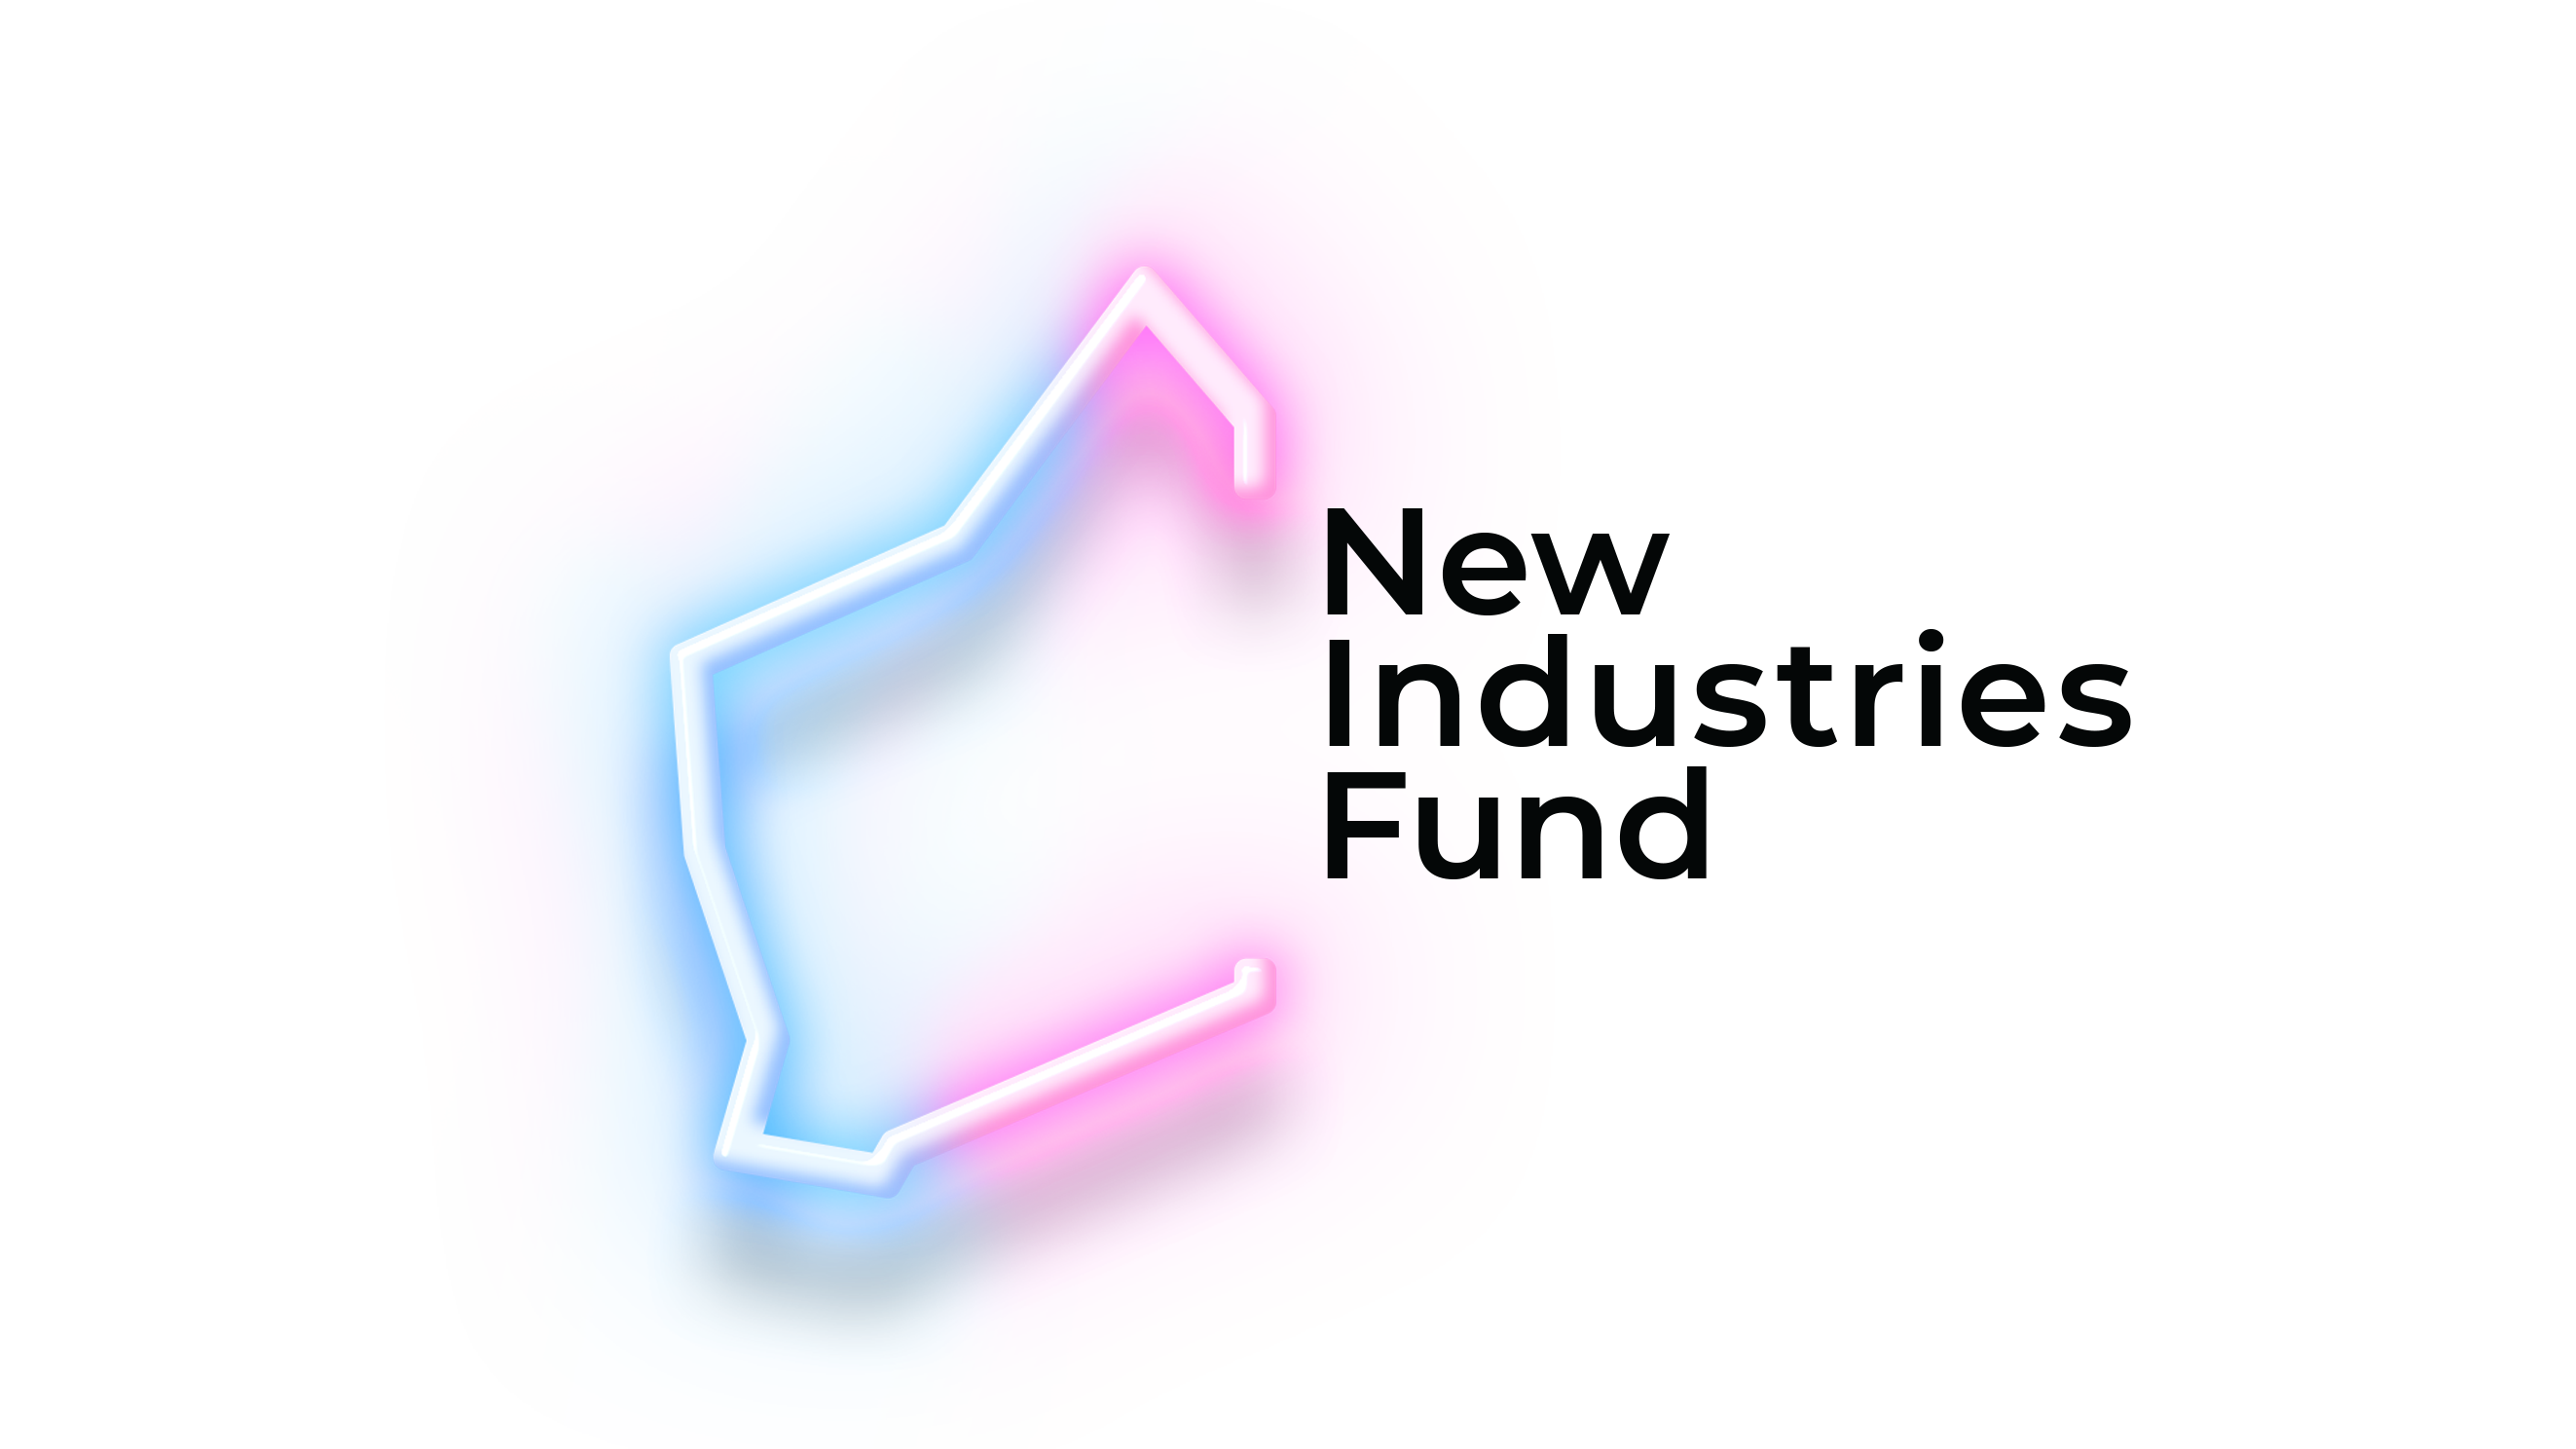 New industries fund logo which contains the shape of WA in a pink and blue glow